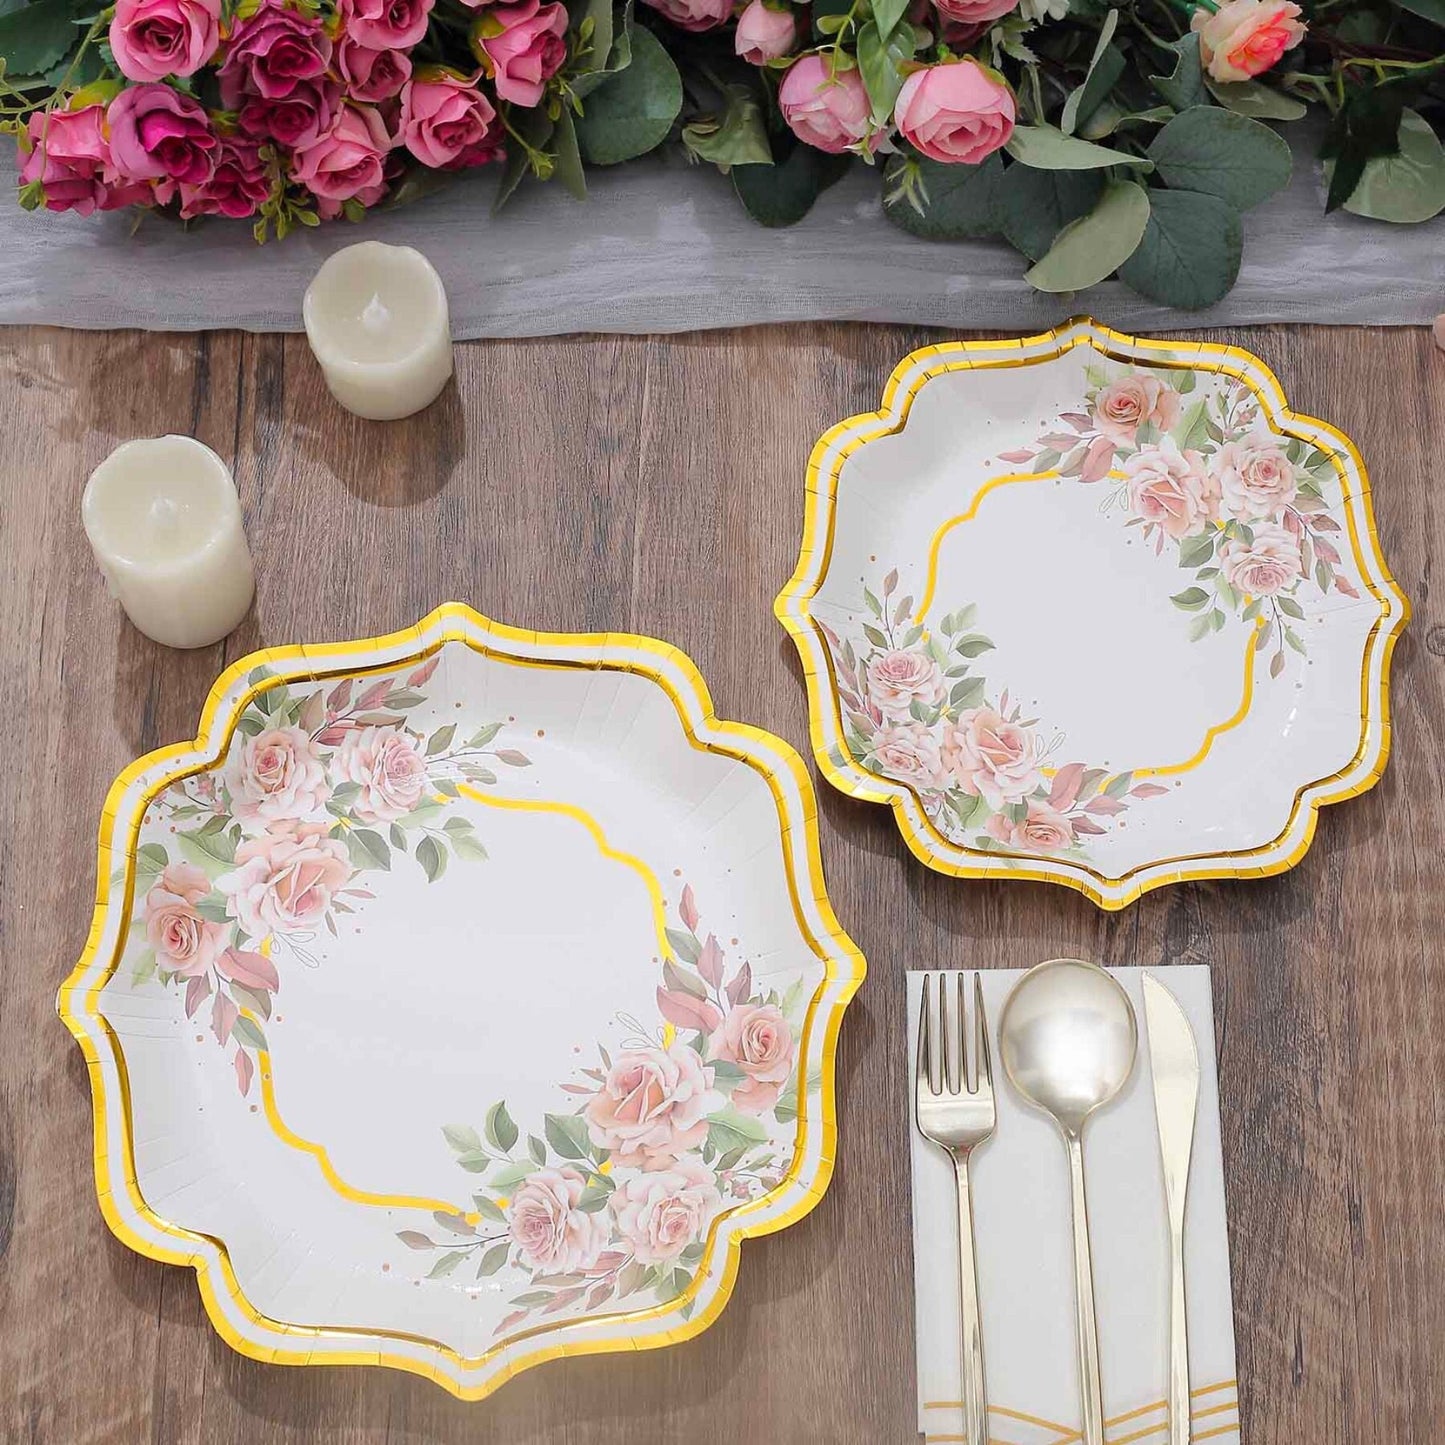 Paper Party Plates Floral Chinoiserie Print